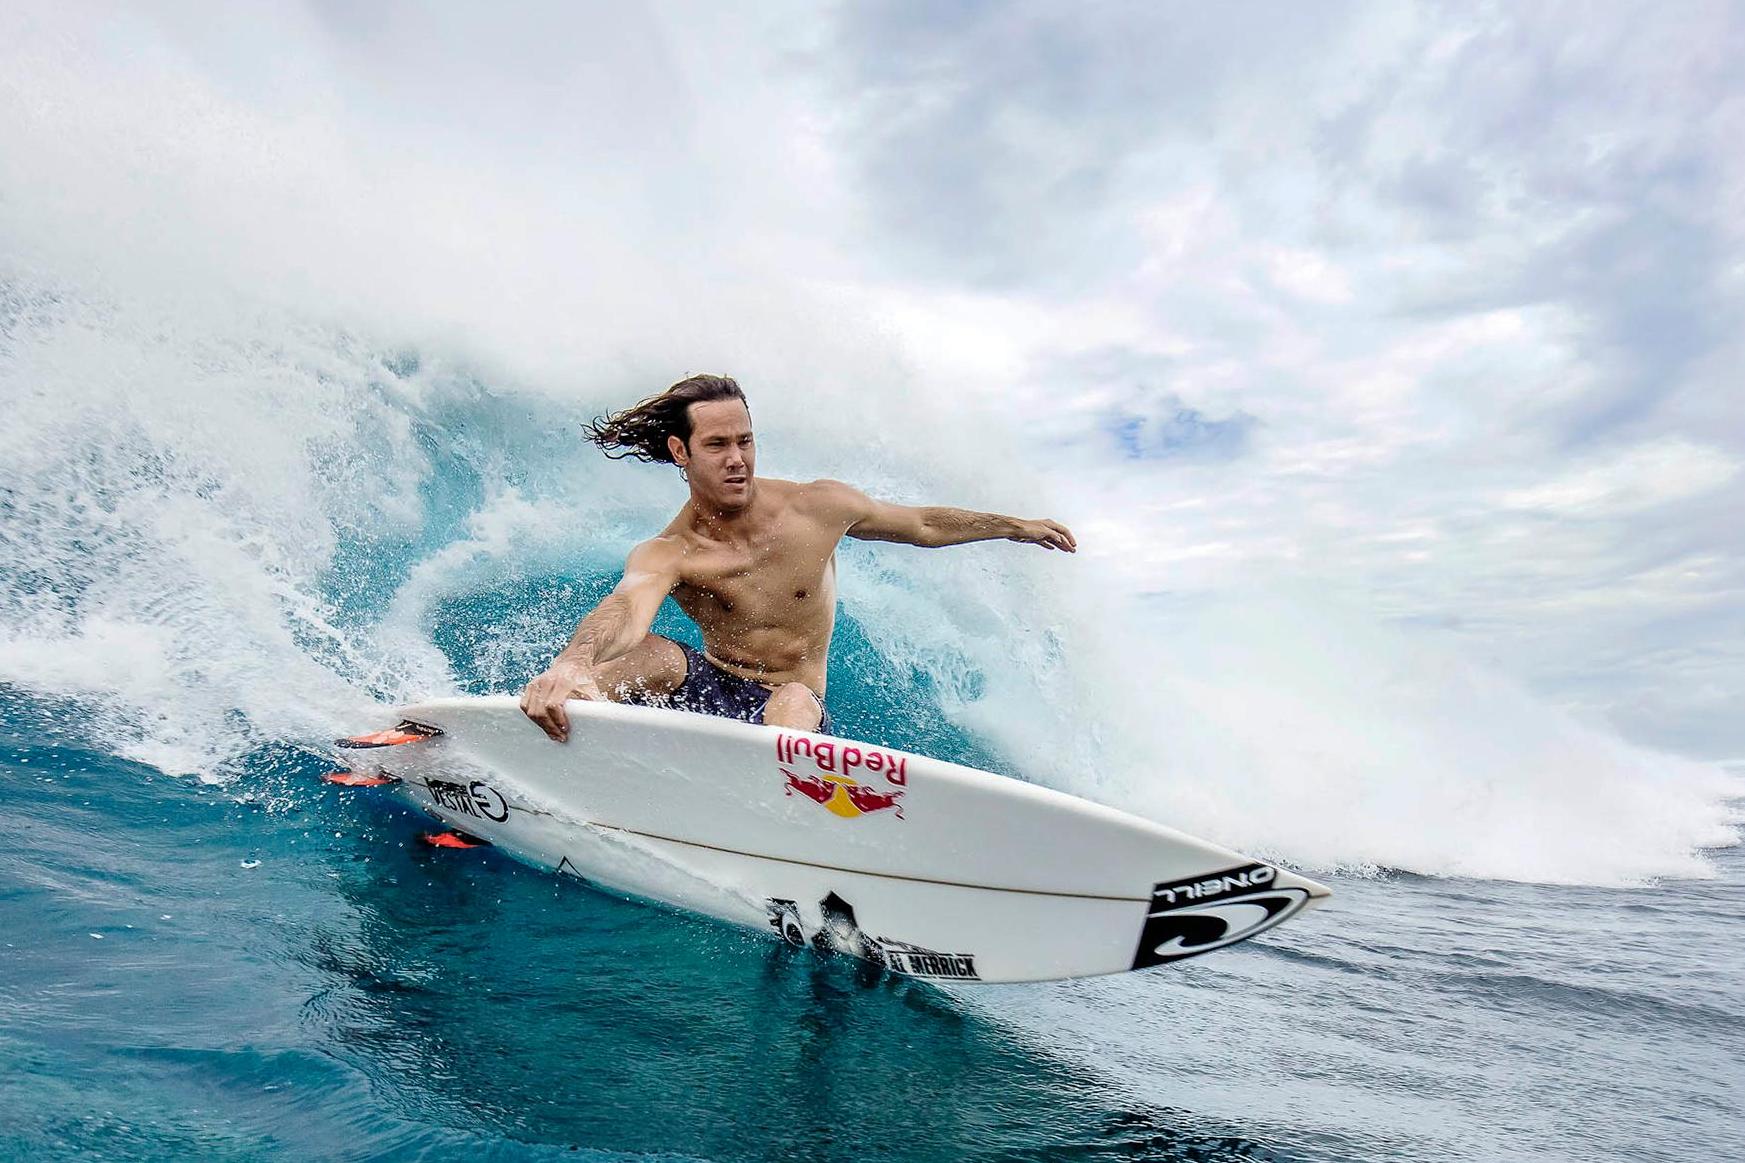 South African Surfer Jordy Smith Shapes Up For World Surf League Competition